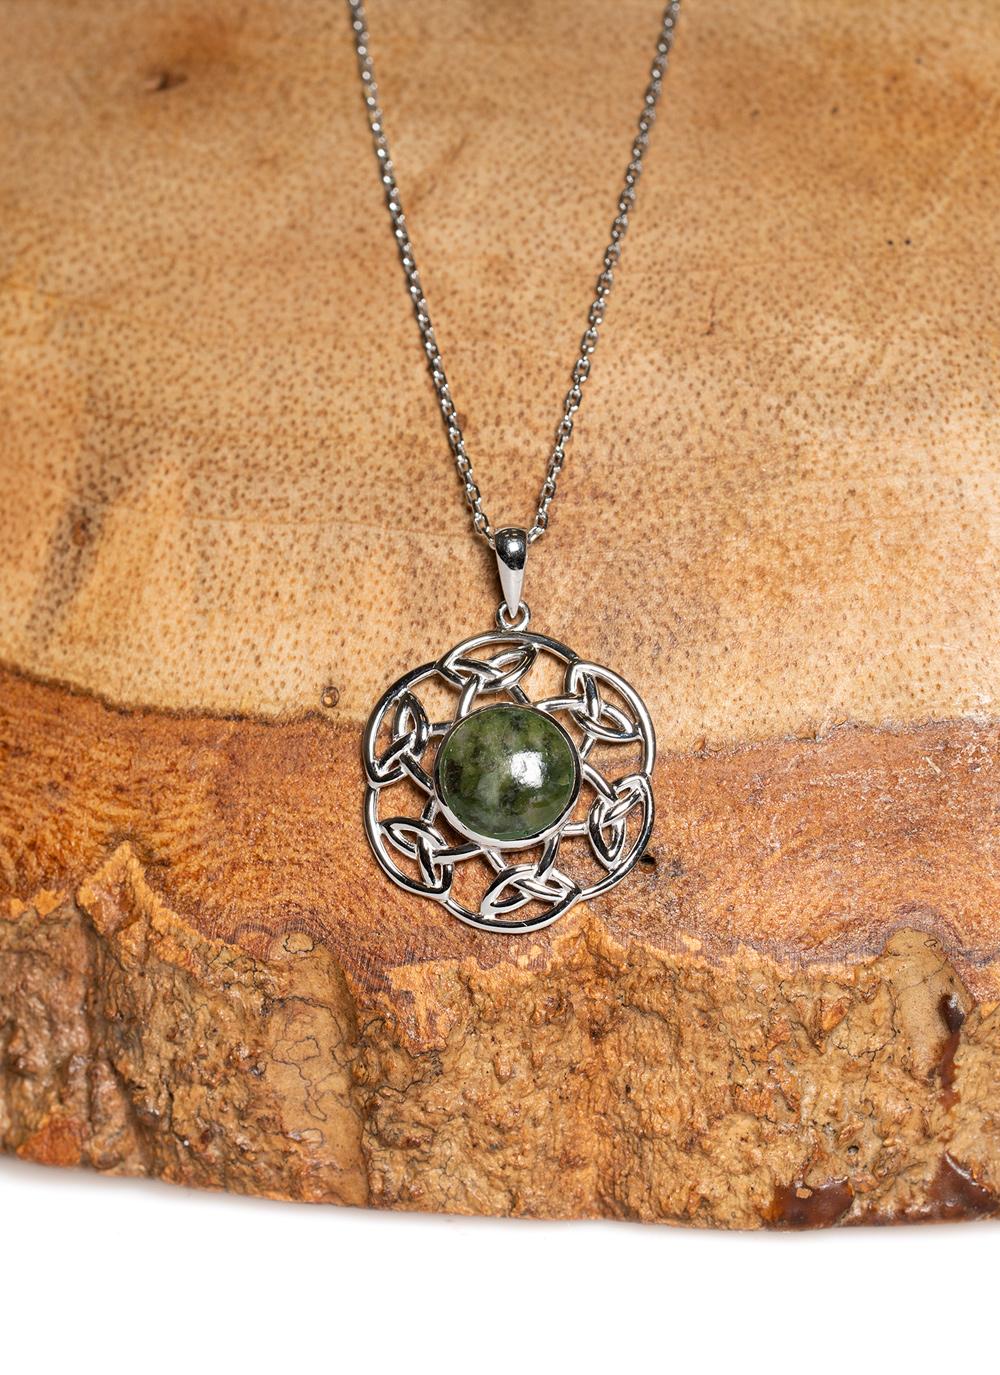 Celtic Design with Crystal and Connemara Marble Bead Necklace